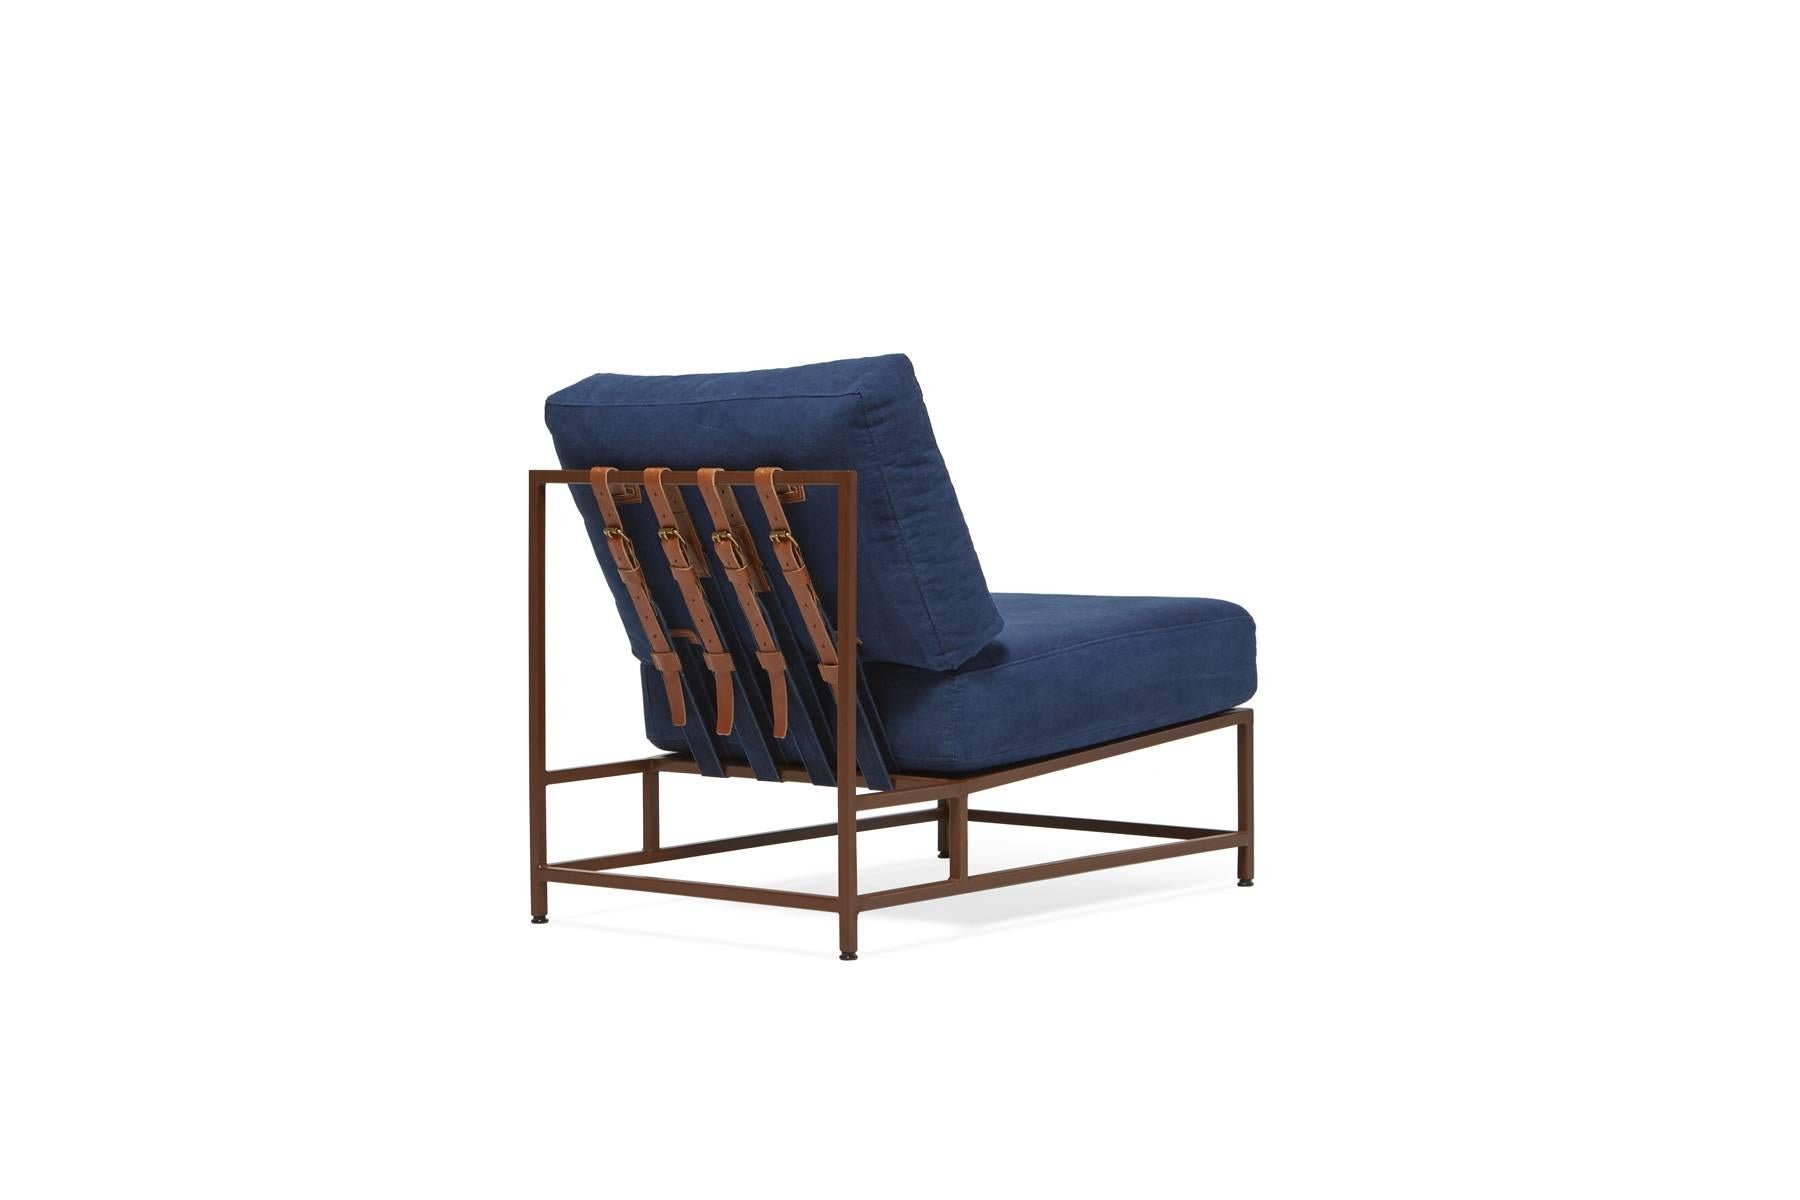 Sleek and refined, the Inheritance Chair is a great addition to nearly any space. 

Inspired by a worn-in pair of jeans and created alongside the team at Simon Miller, USA, our indigo cotton canvas is hand dyed using a chemical free process and